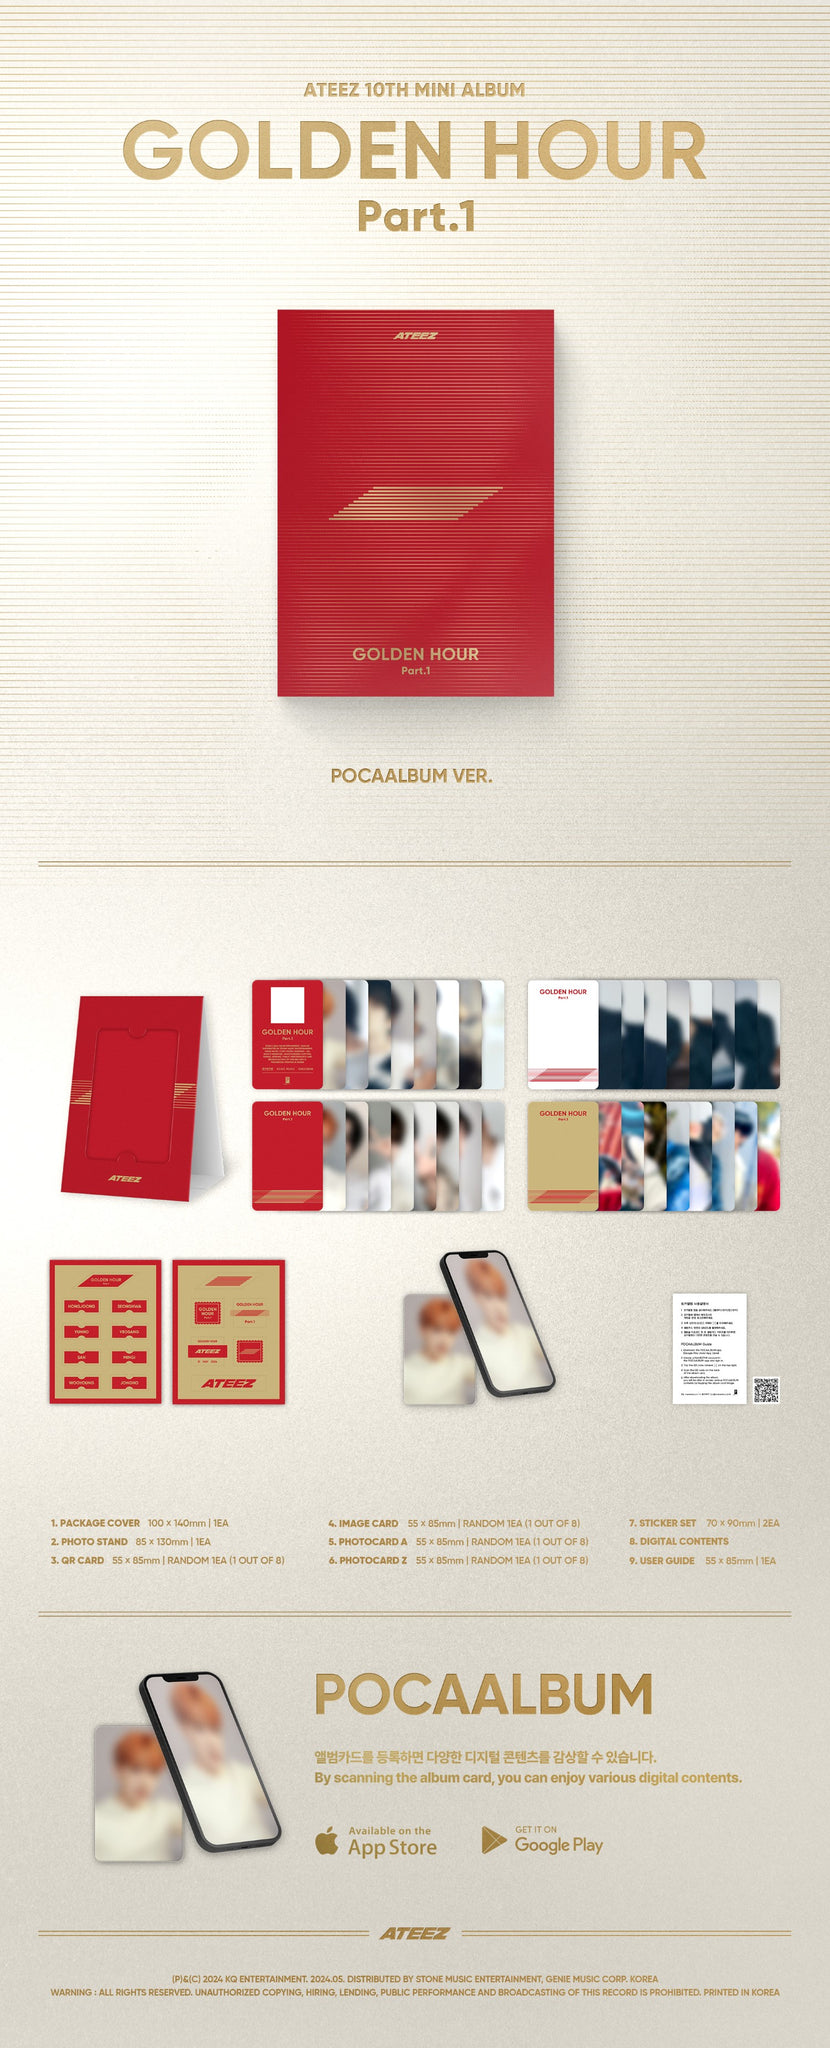 ATEEZ 10th Mini Album GOLDEN HOUR : Part.1 - POCA Version Inclusions: Package Cover, Photo Stand, QR Card, Image Card, Photocard A, Photocard Z, Sticker Set, User Guide